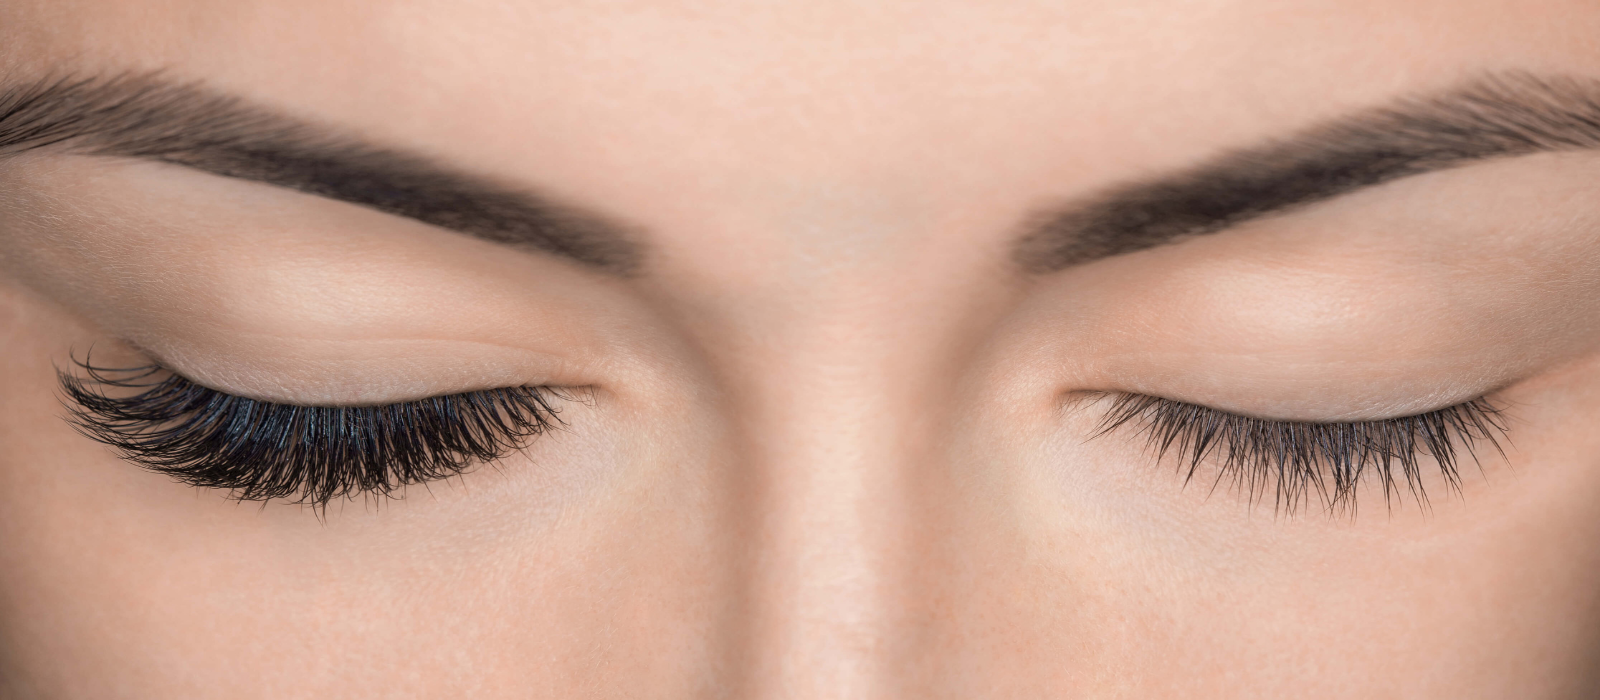 Know More About Eyelash Extensions In Dubai - Ruhee